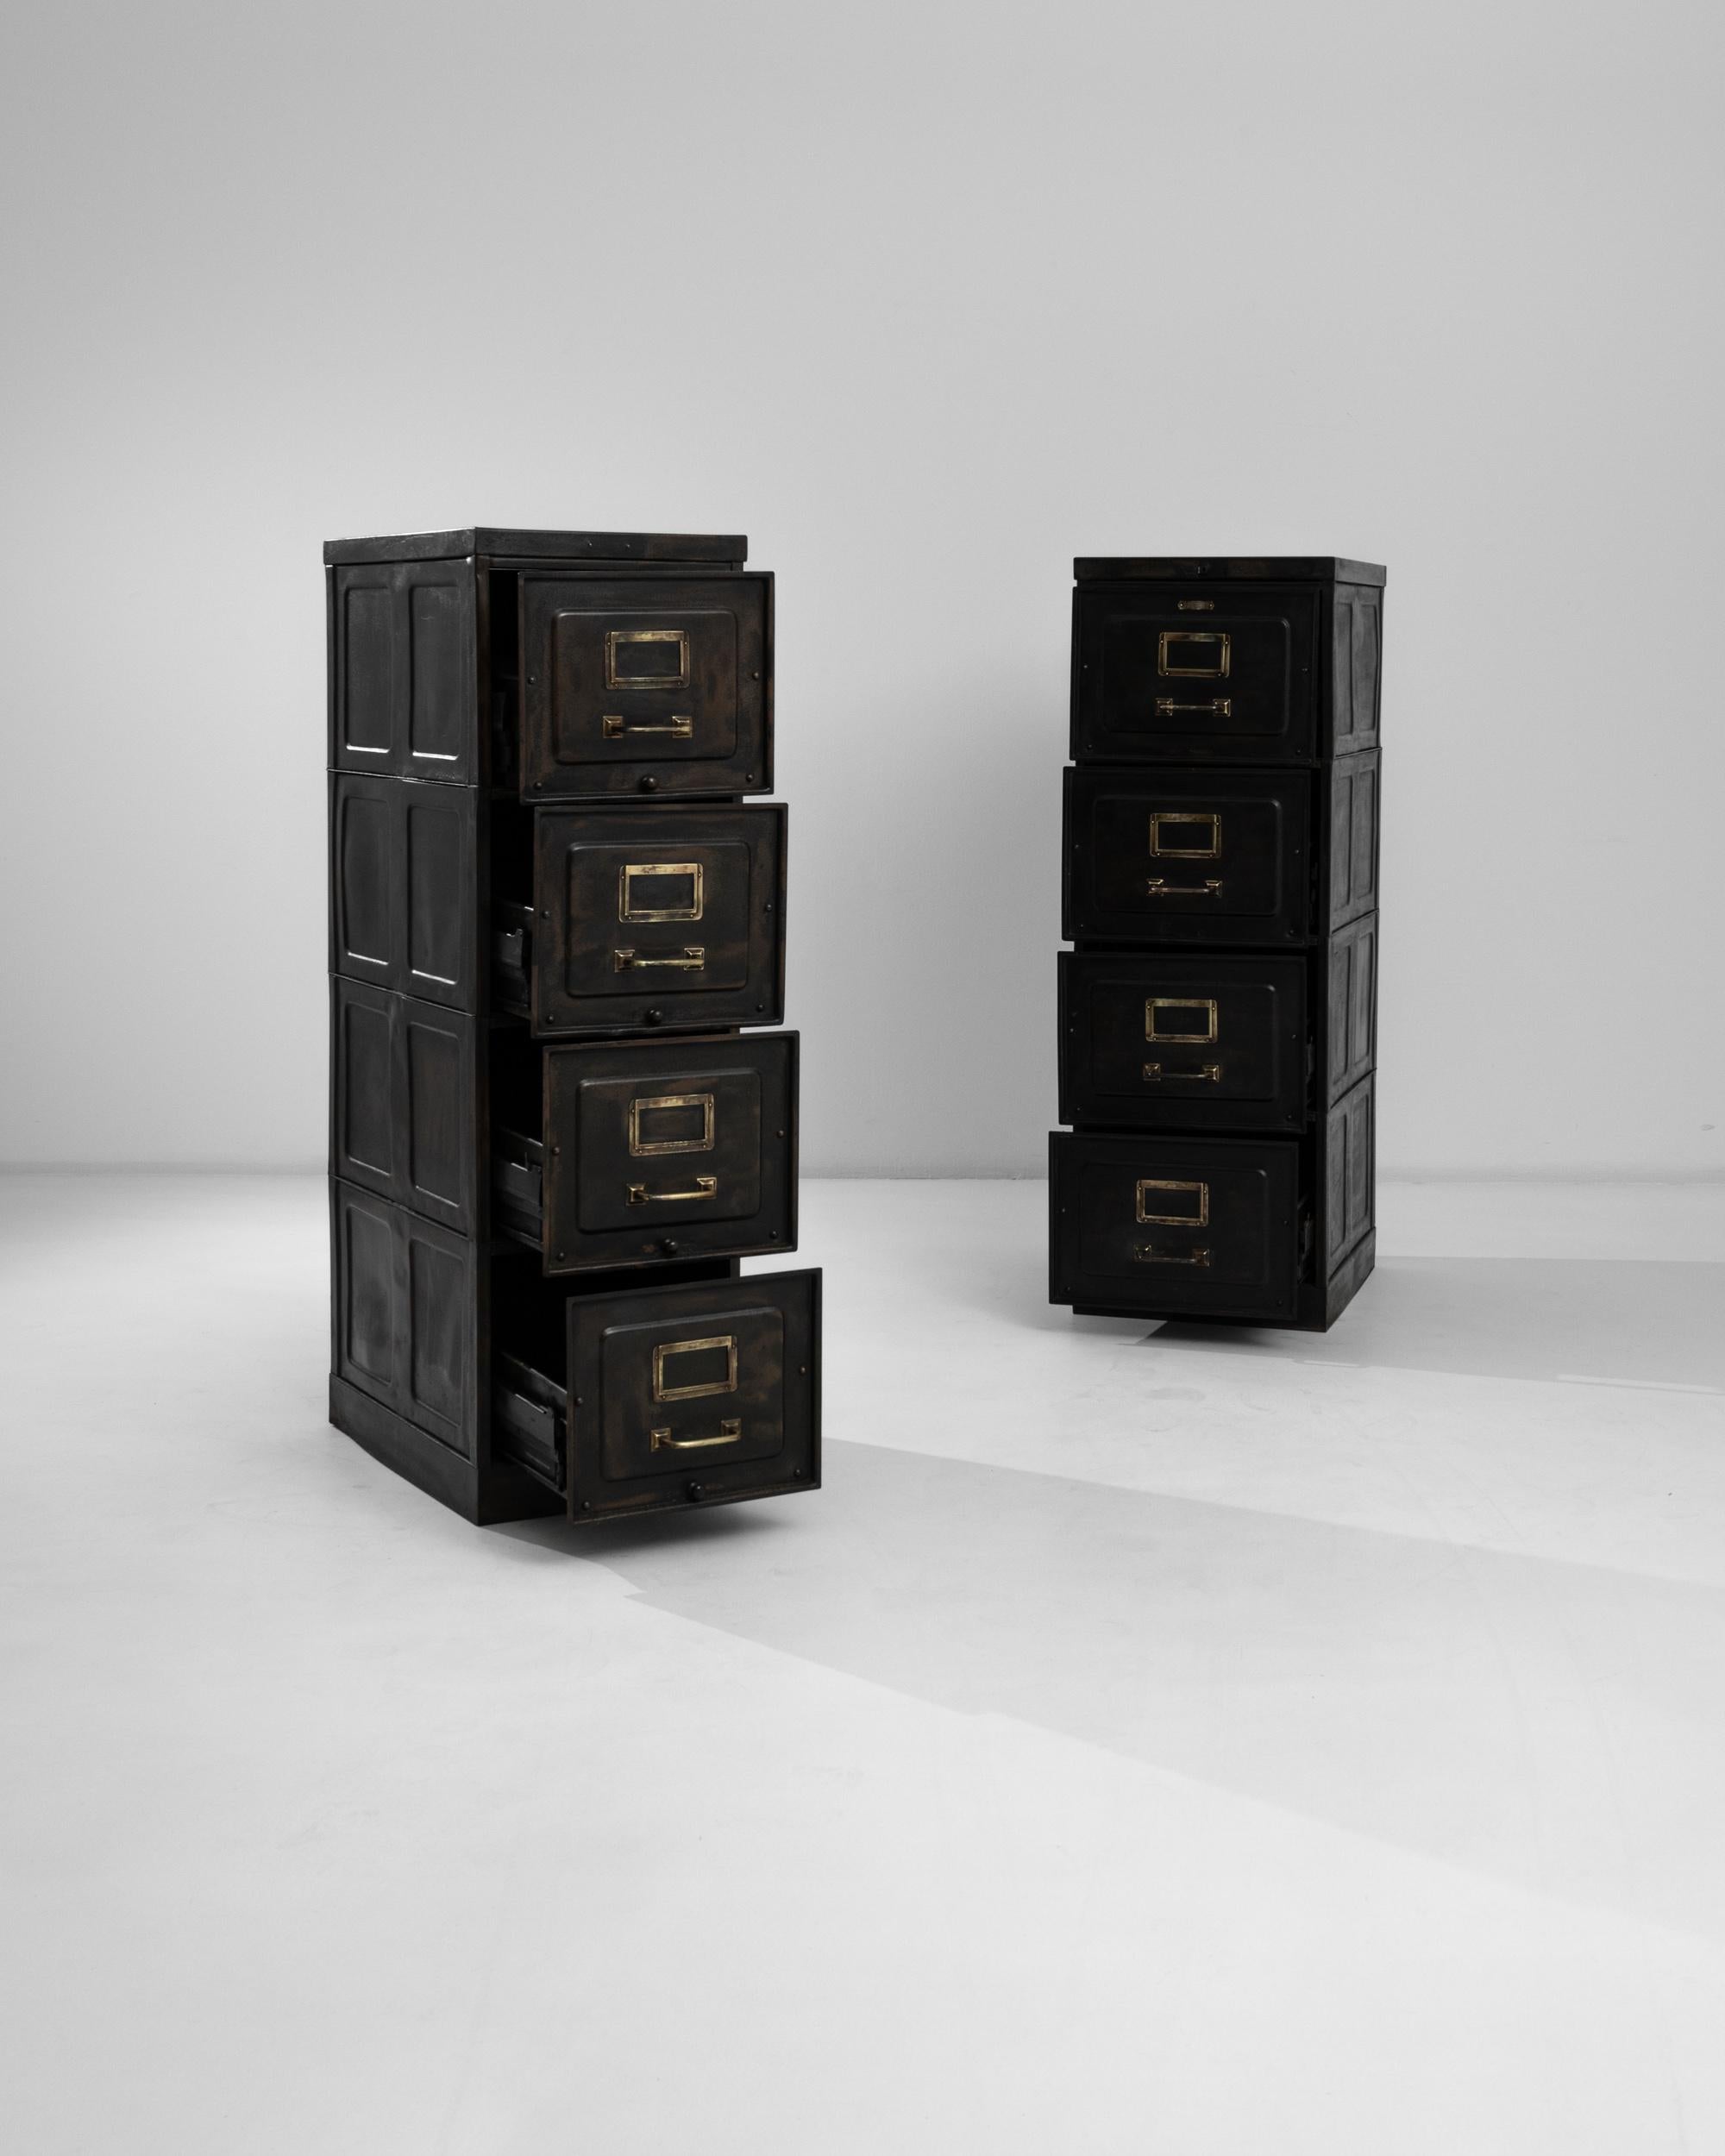 This pair of industrial metal cabinets were manufactured circa 1900 in Belgium by H.E. Longini, attested by the brass manufacturer's plate. Four spacious drawers are equipped with brass pulls and label holders that glimmer against the darkness of